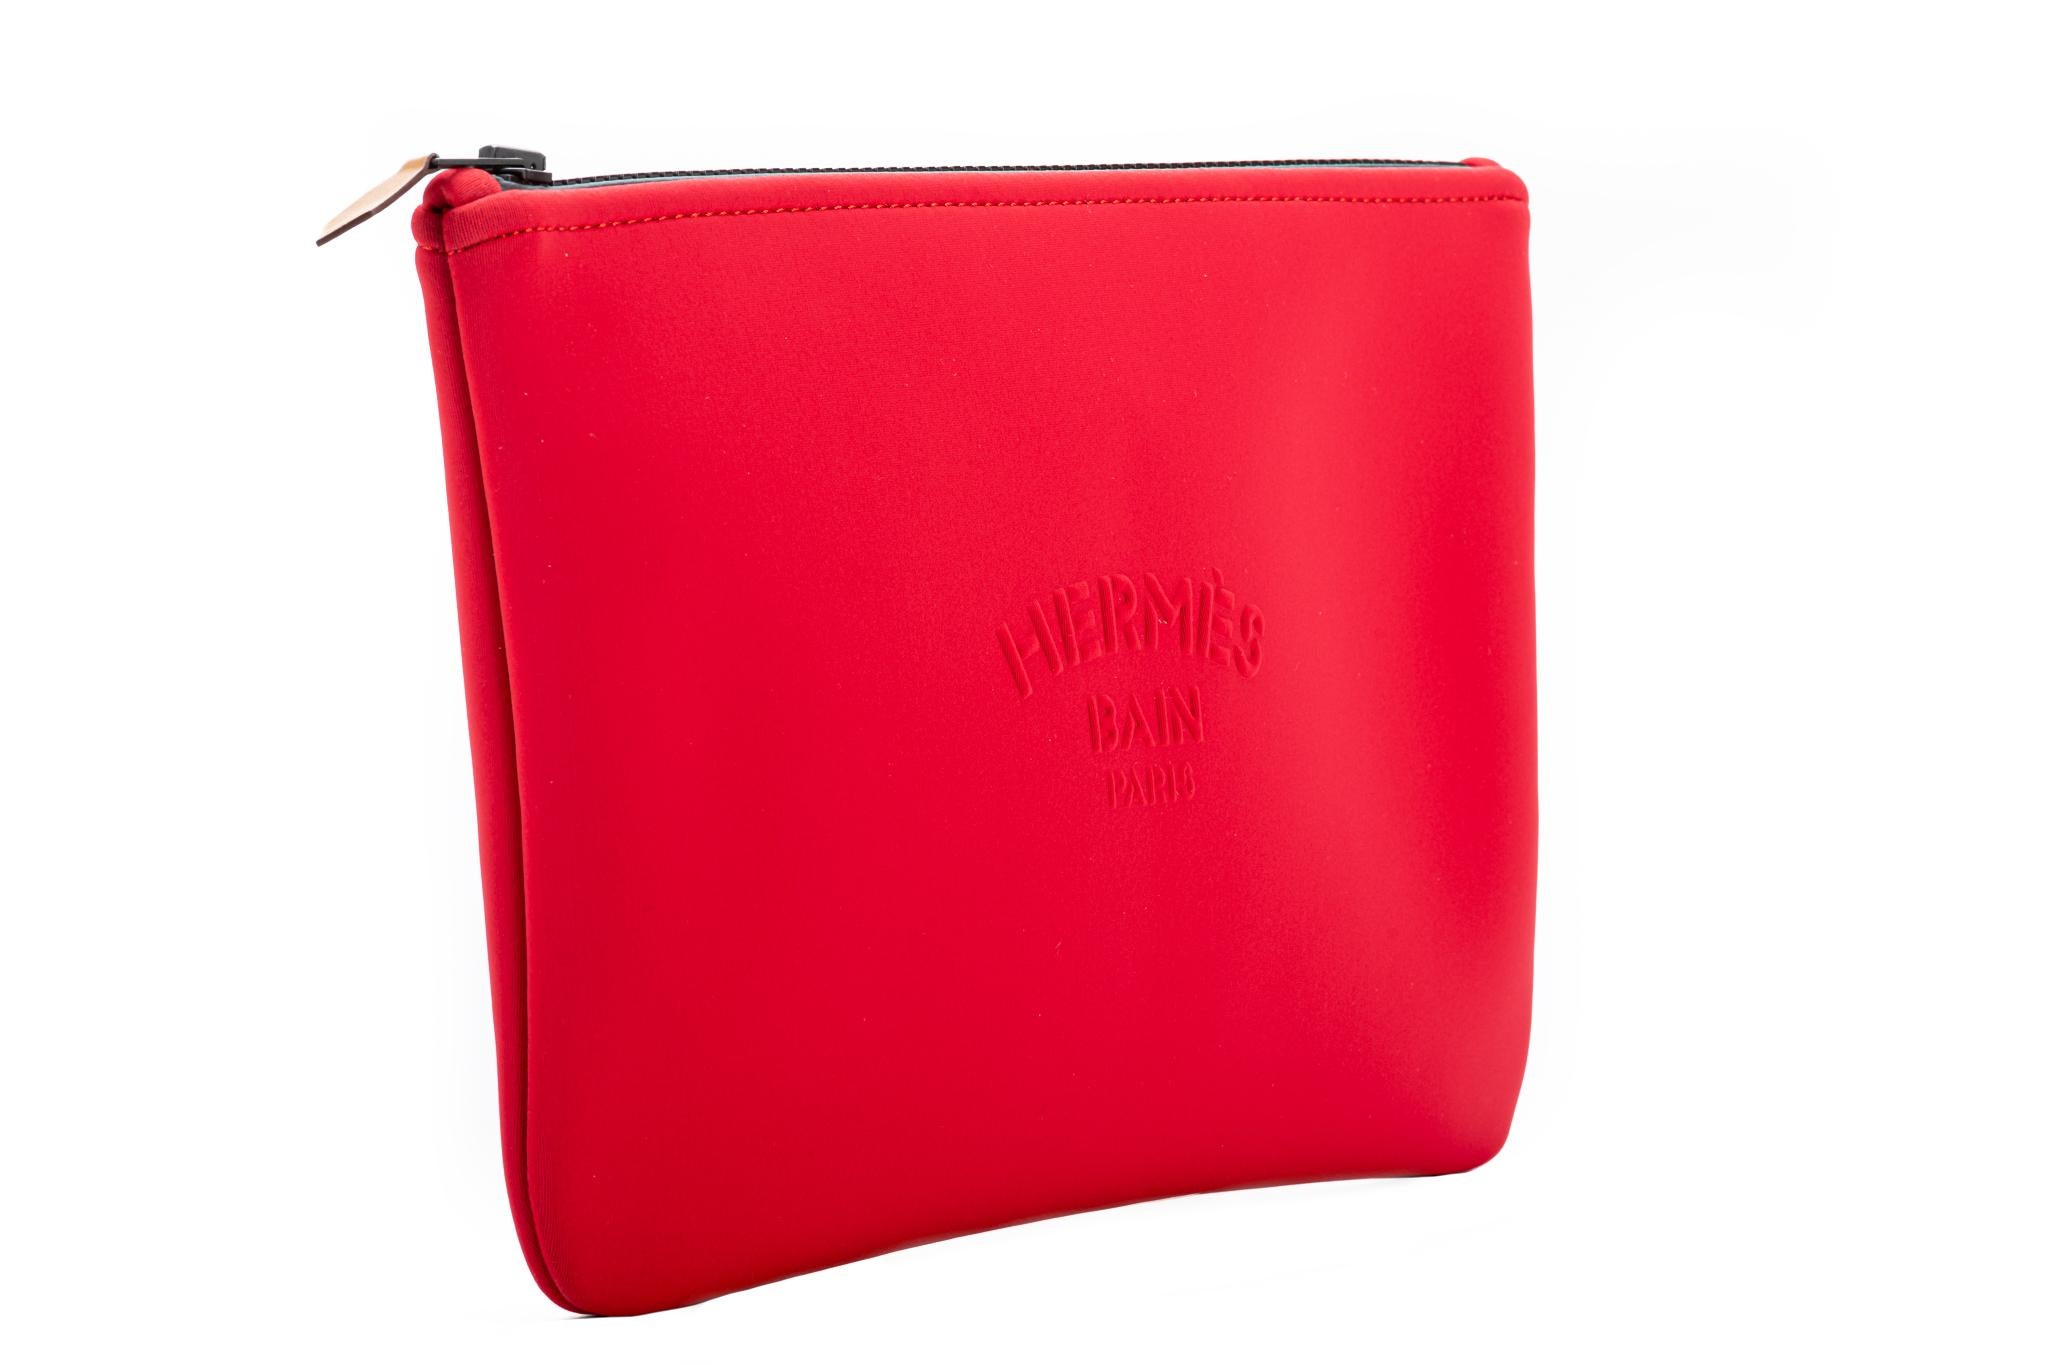 Hermès new coral red neoprene pochette/toiletry bag. supplied with hermes shopping bag.